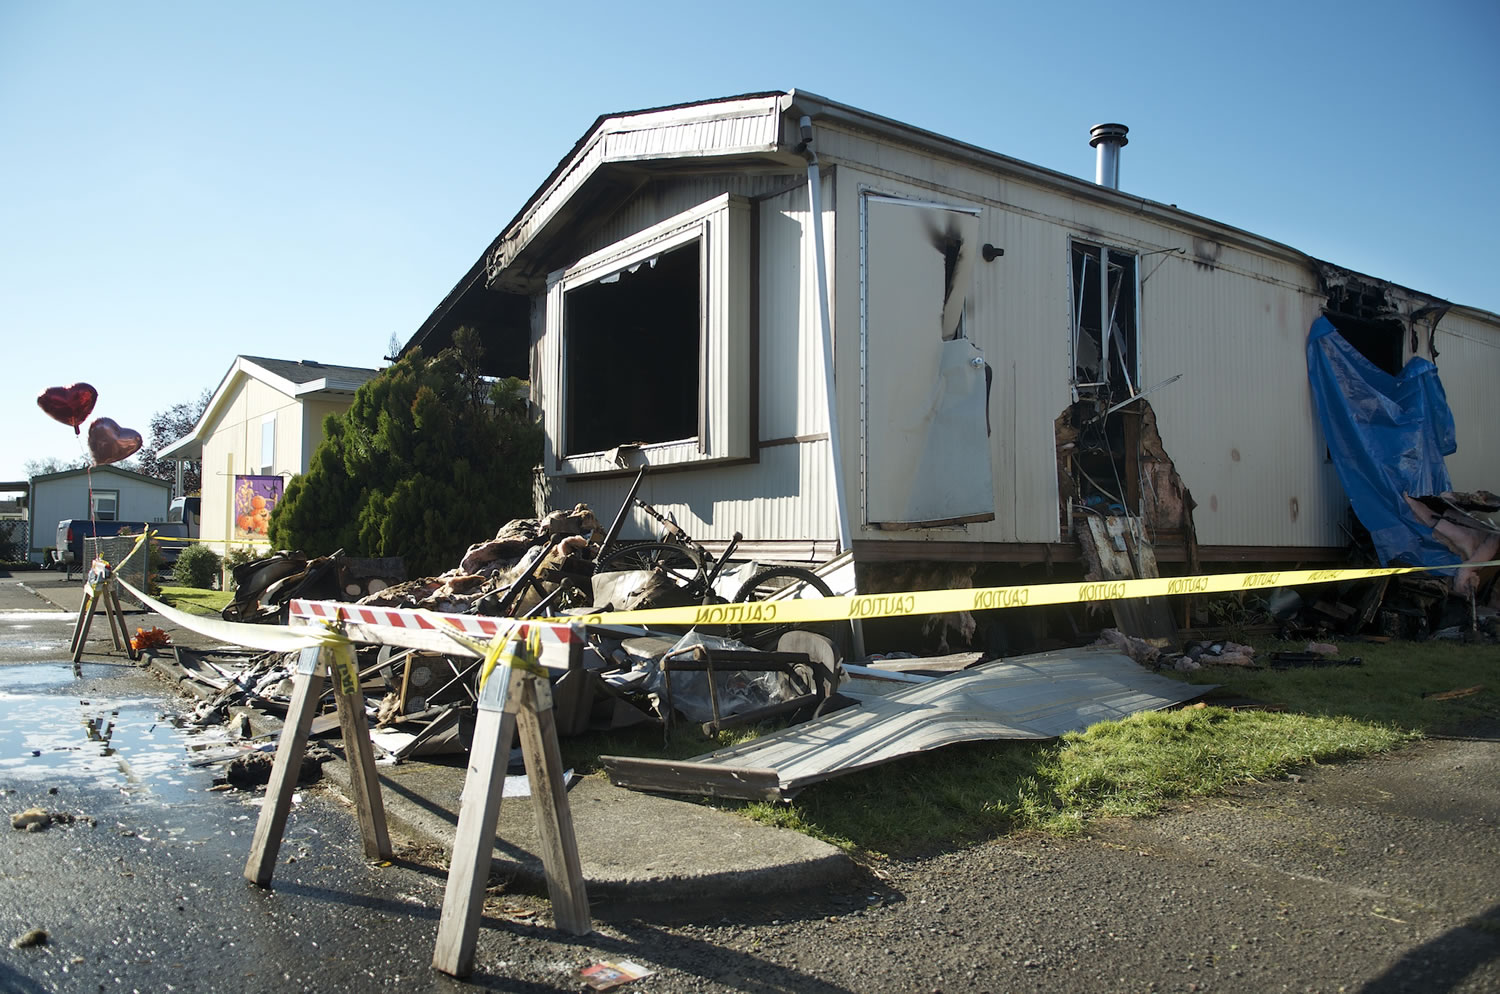 A 53 year-old woman died in a fatal house fire, seen here photographed Tuesday October 29, 2013 in Battle Ground, Washington.